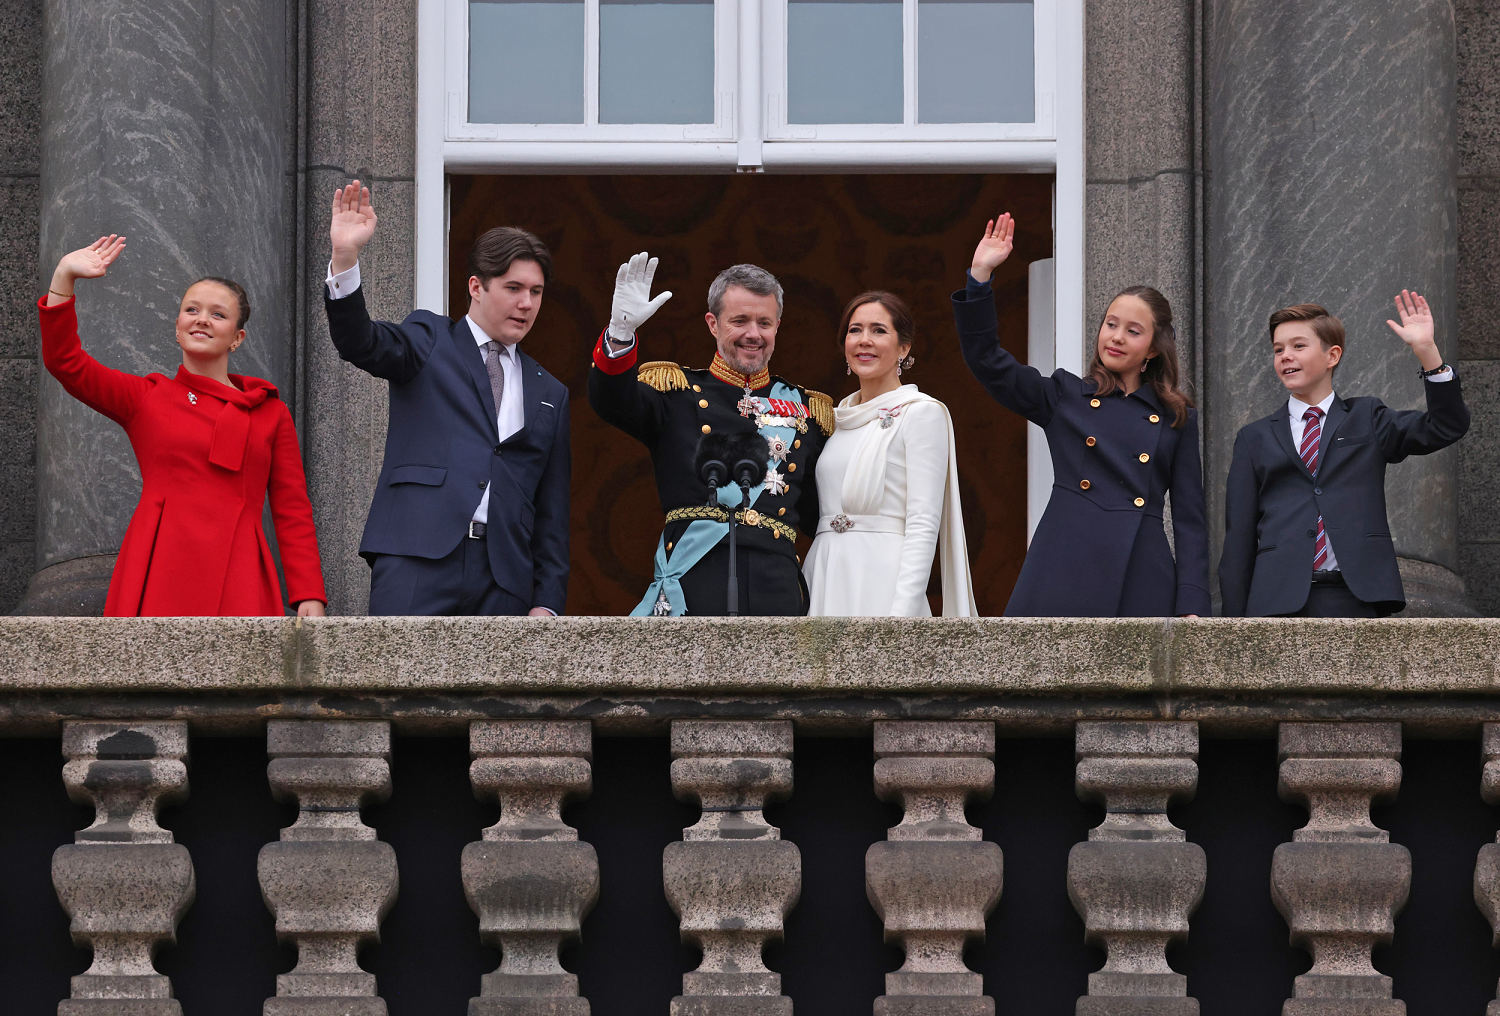 Frederik X is proclaimed the new king of Denmark after his mother, Queen Margrethe II, abdicates